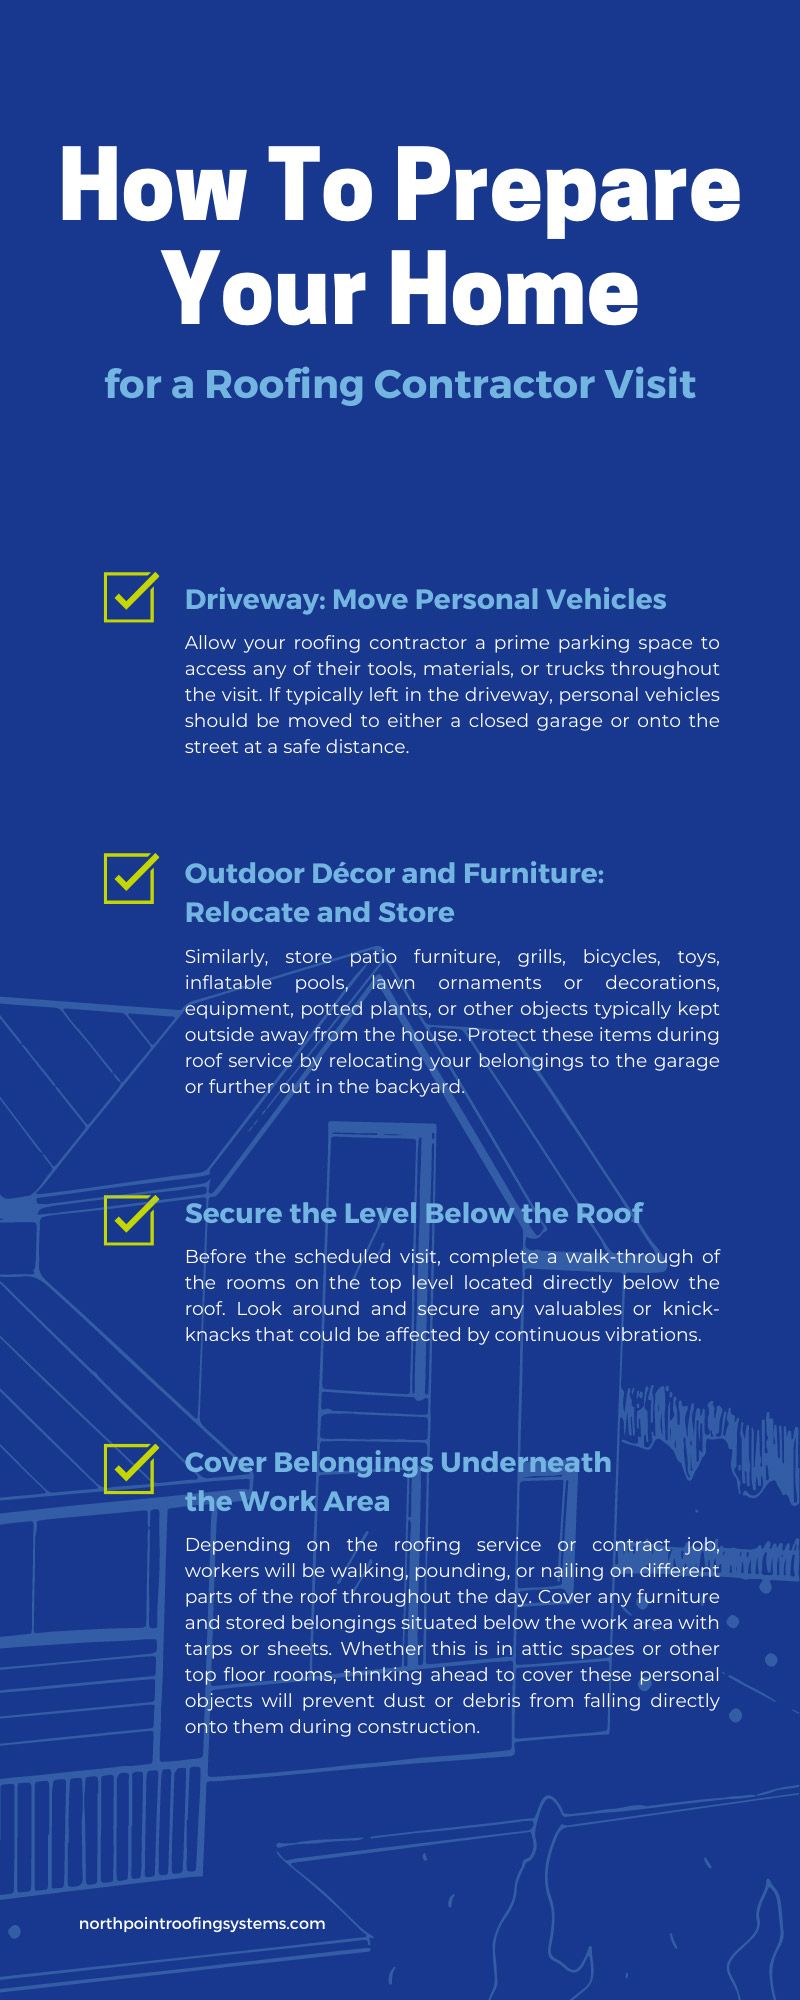 How To Prepare Your Home for a Roofing Contractor Visit